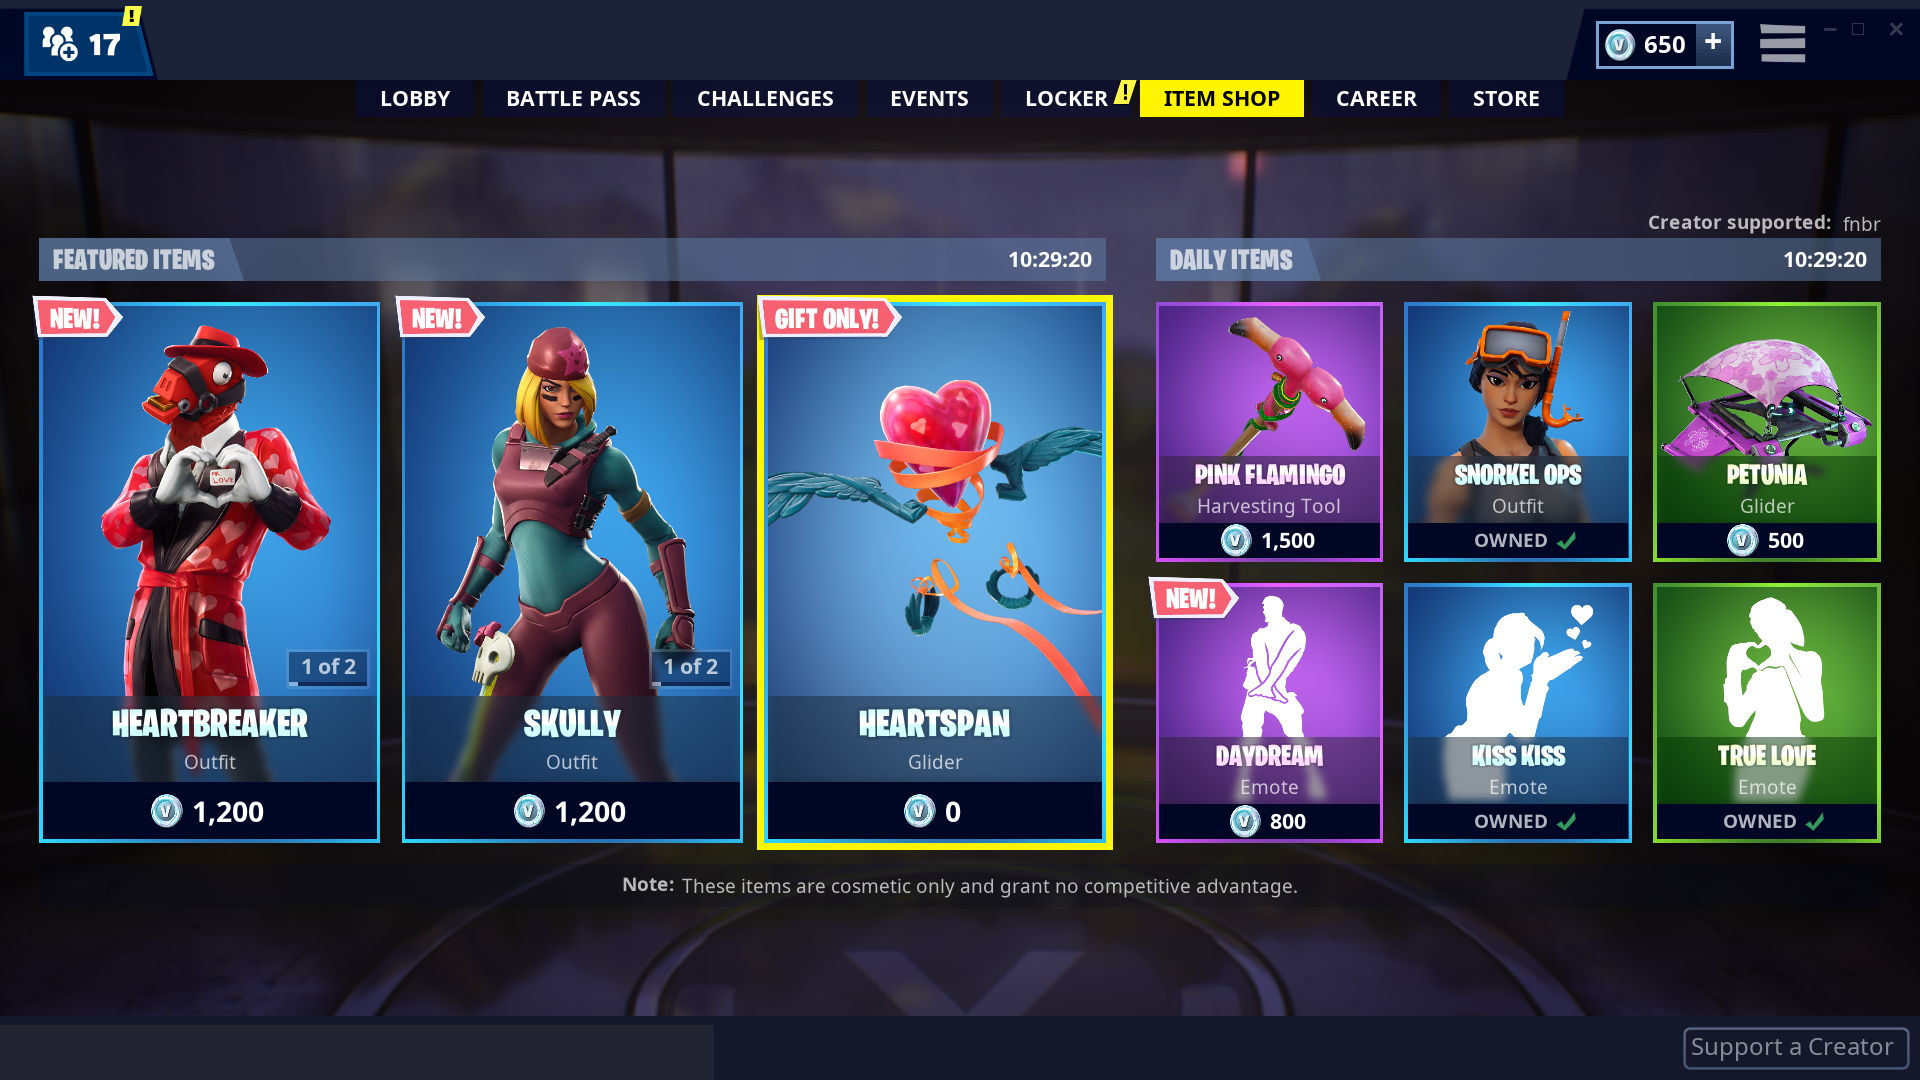 head to the item shop tab and select the heartspan panel - fortnite free generator